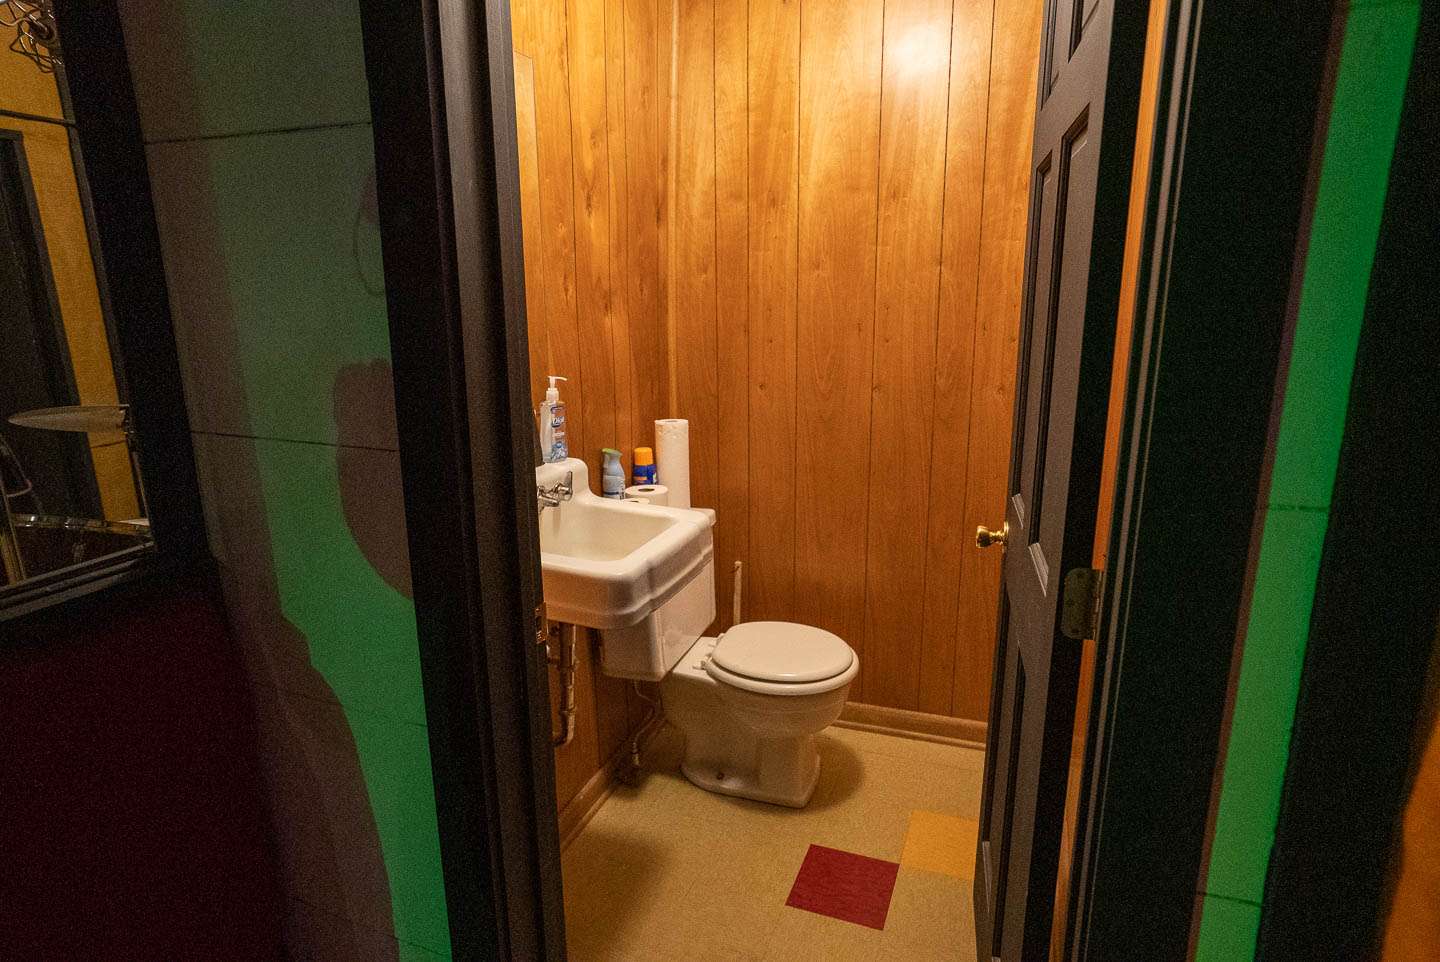 This little bathroom in the studio has a great story behind it - Keith Richards wrote the Rolling Stones' hit song Wild Horses in it. 